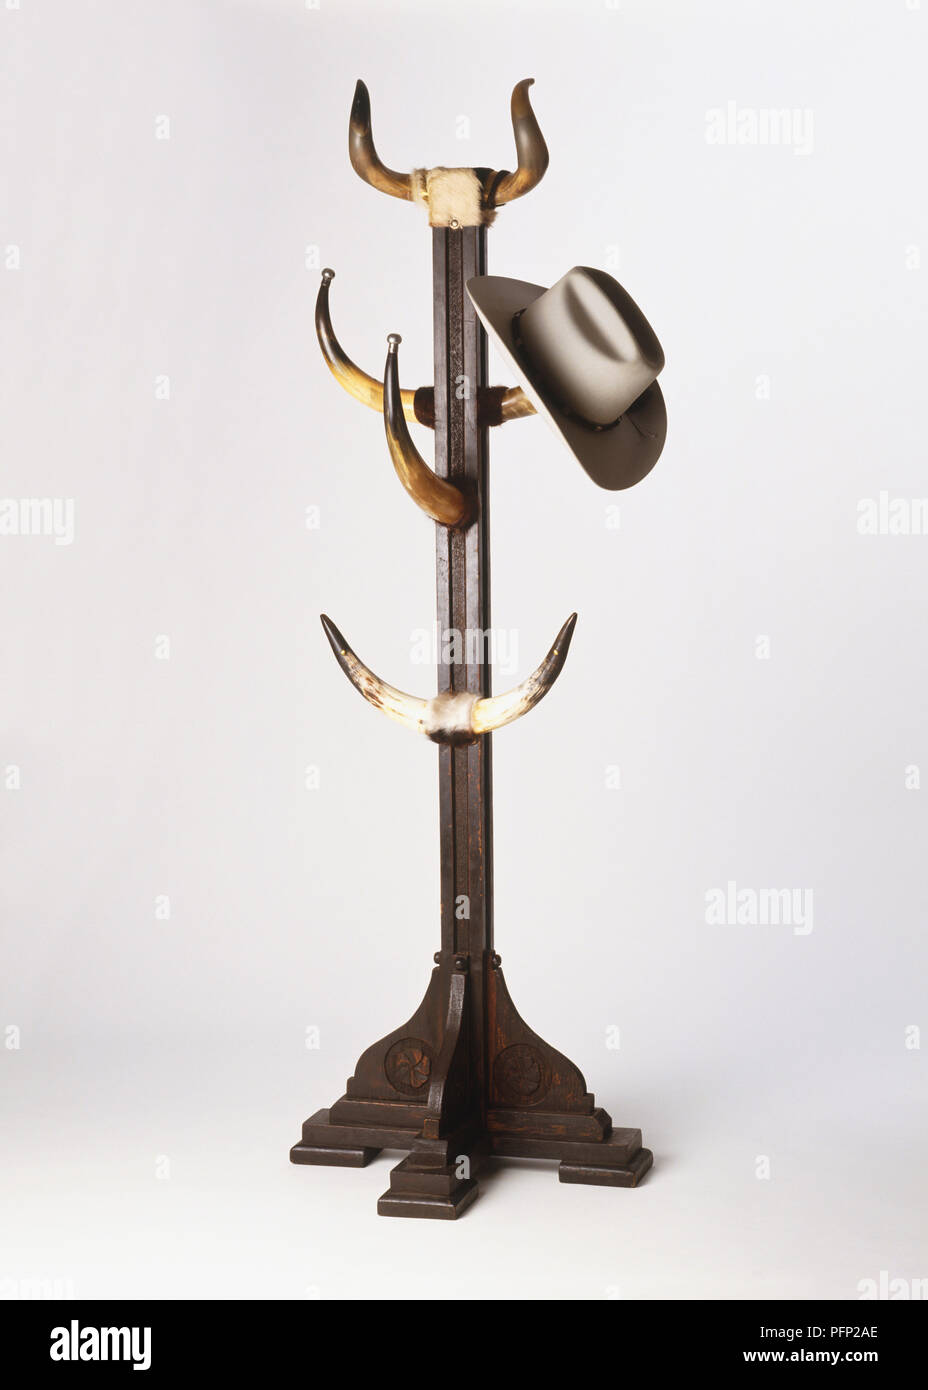 Hatstand made of horns and hide Stock Photo